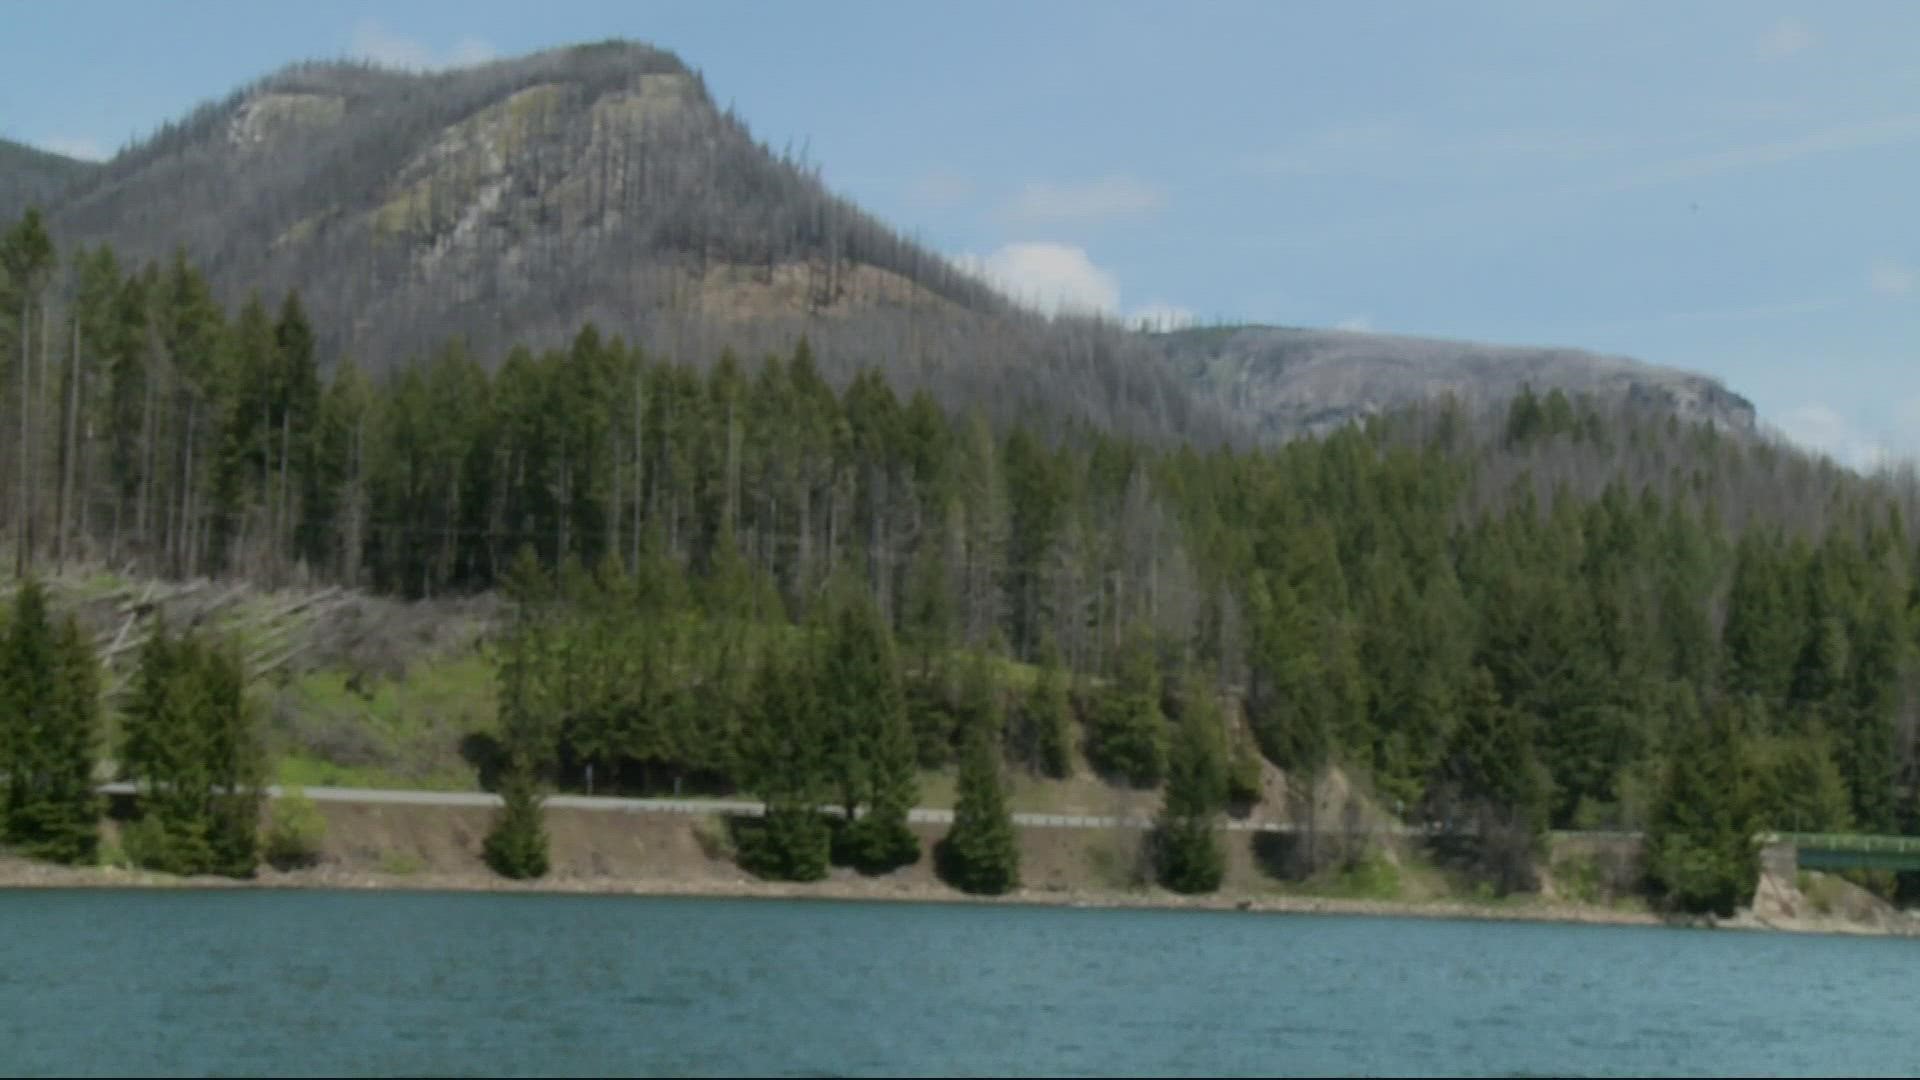 Detroit Lake, a popular recreation area between Salem and Bend, Oregon, is finally full again after years of low levels due to drought.